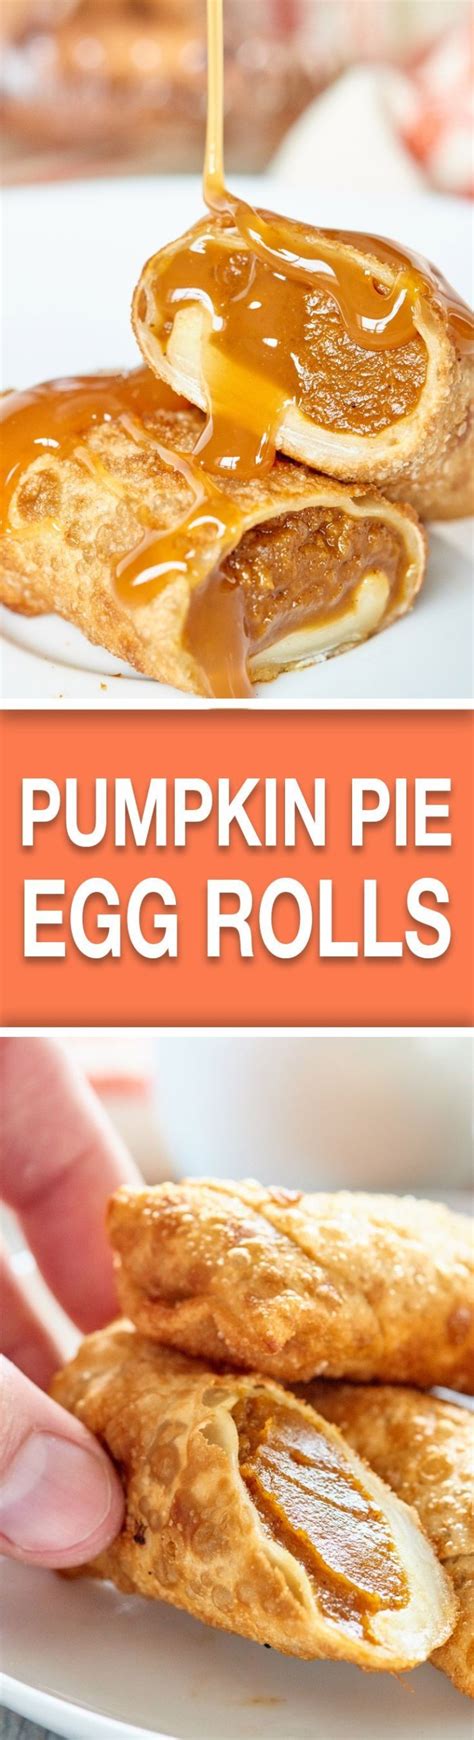 Eggs are most commonly thought of as a key ingredient in a number of savoury dishes, however they also hold an equally important place in sweet top tip: PUMPKIN PIE EGG ROLLS | CookJino | Pumpkin recipes, Food, Pumpkin flavor